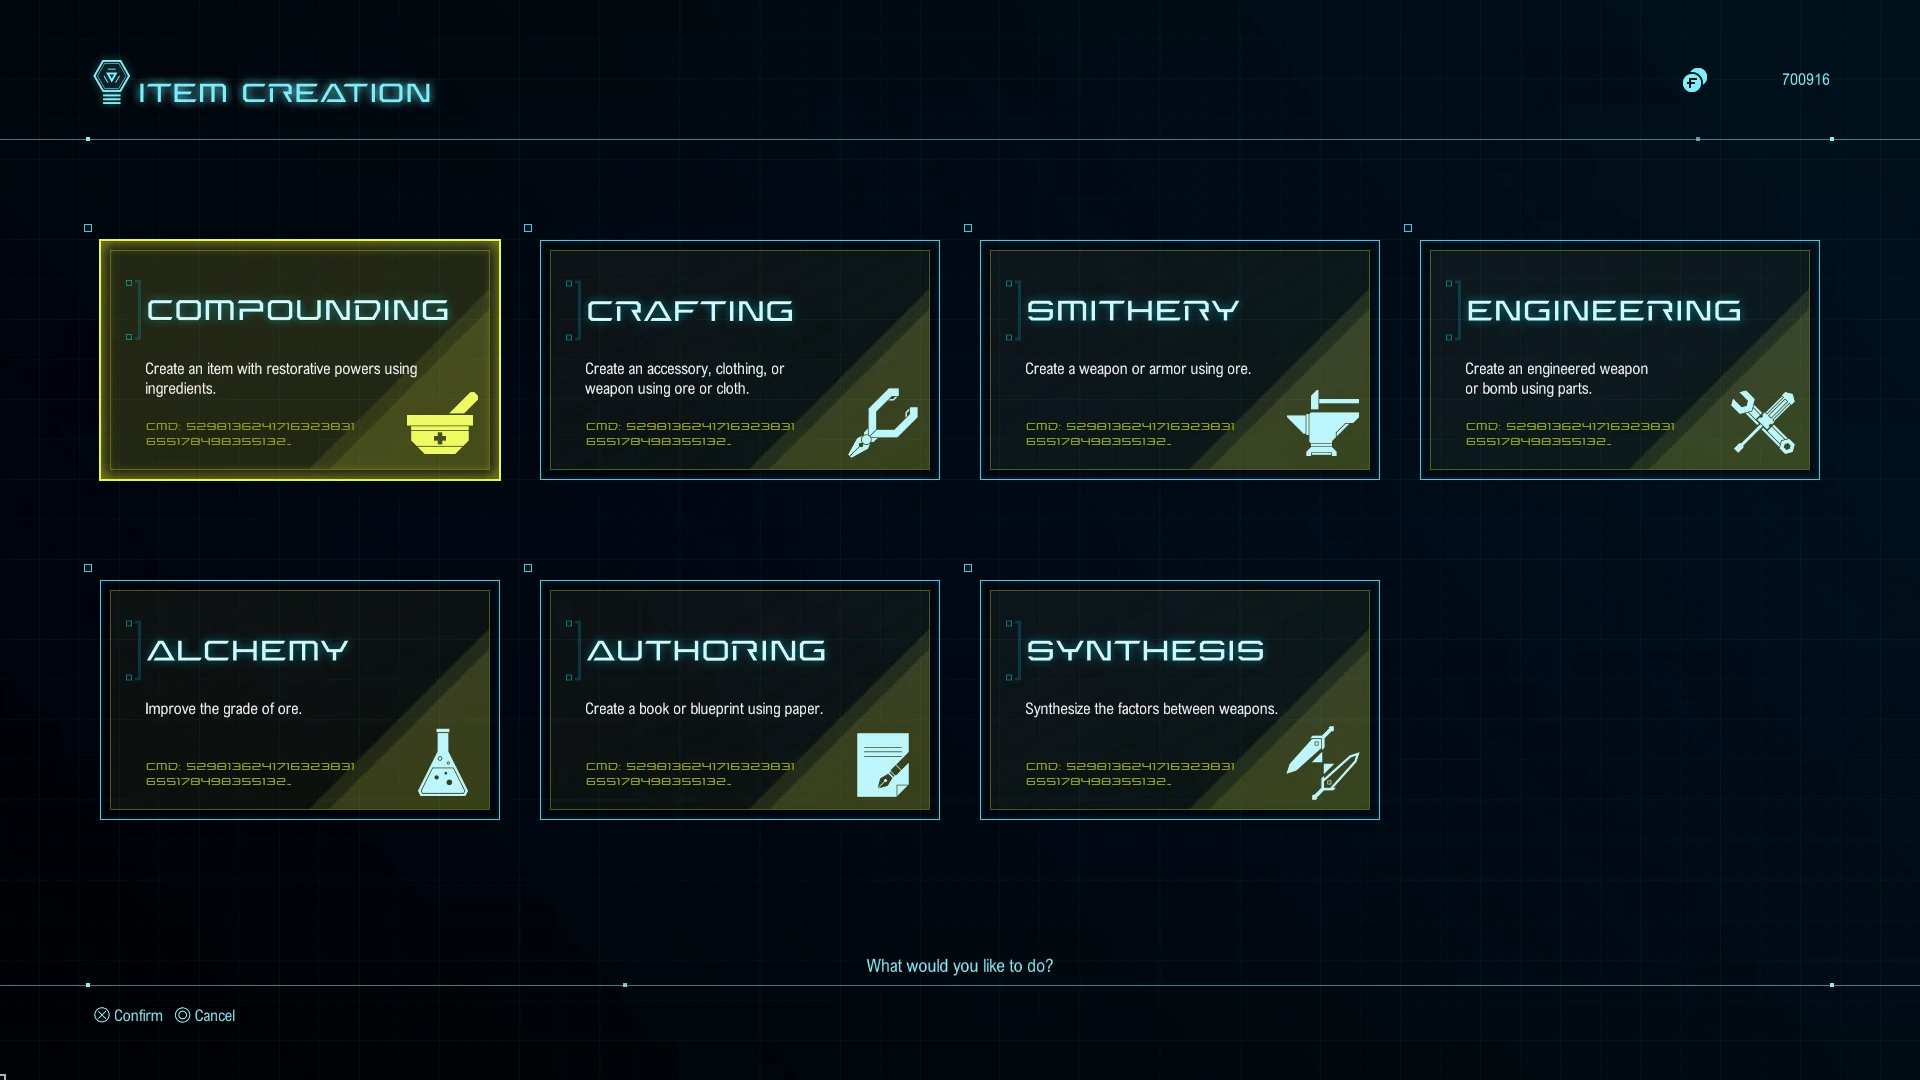 An image of the Item Creation menu, showing the 7 available disciplines: Compounding, Crafting, Smithery, Engineering, Alchemy, Authoring, and Synthesis